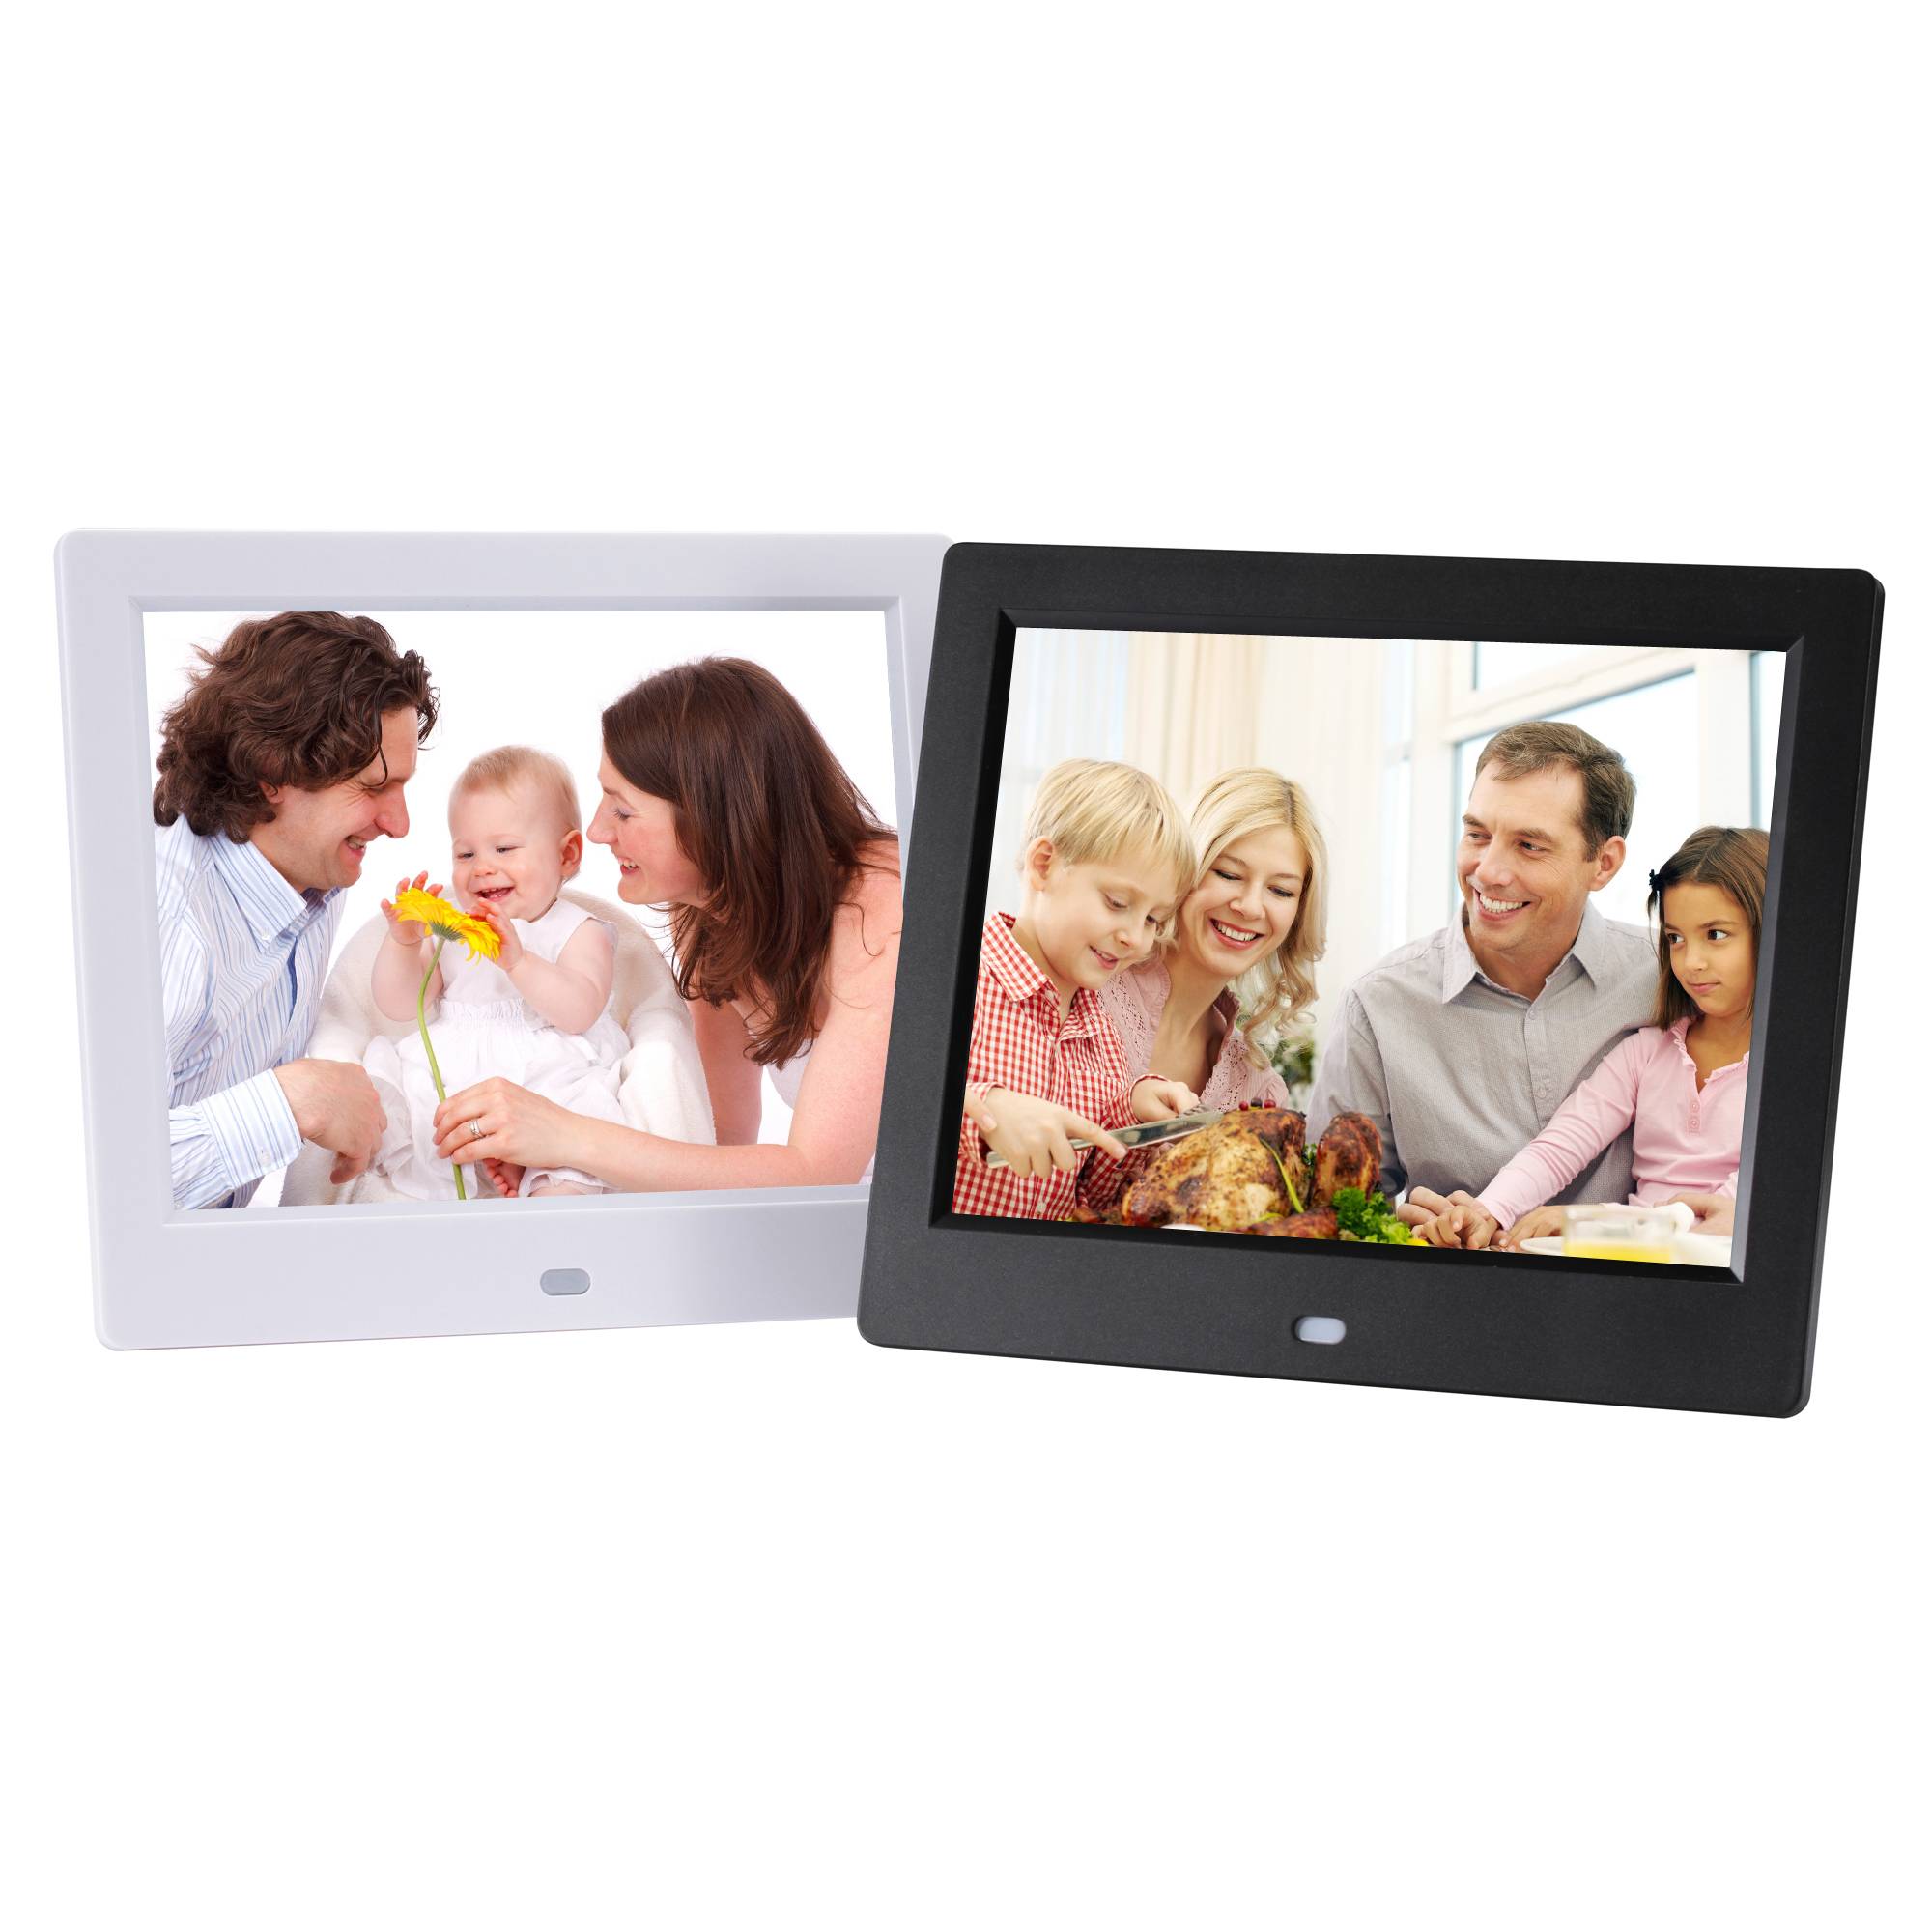 OEM Manufacturer Battery Powered Digital Photo Frame - 8 inch slideshow cheap video player digital picture frame digital photo frame commercial advertising HD support 720P – Idealway